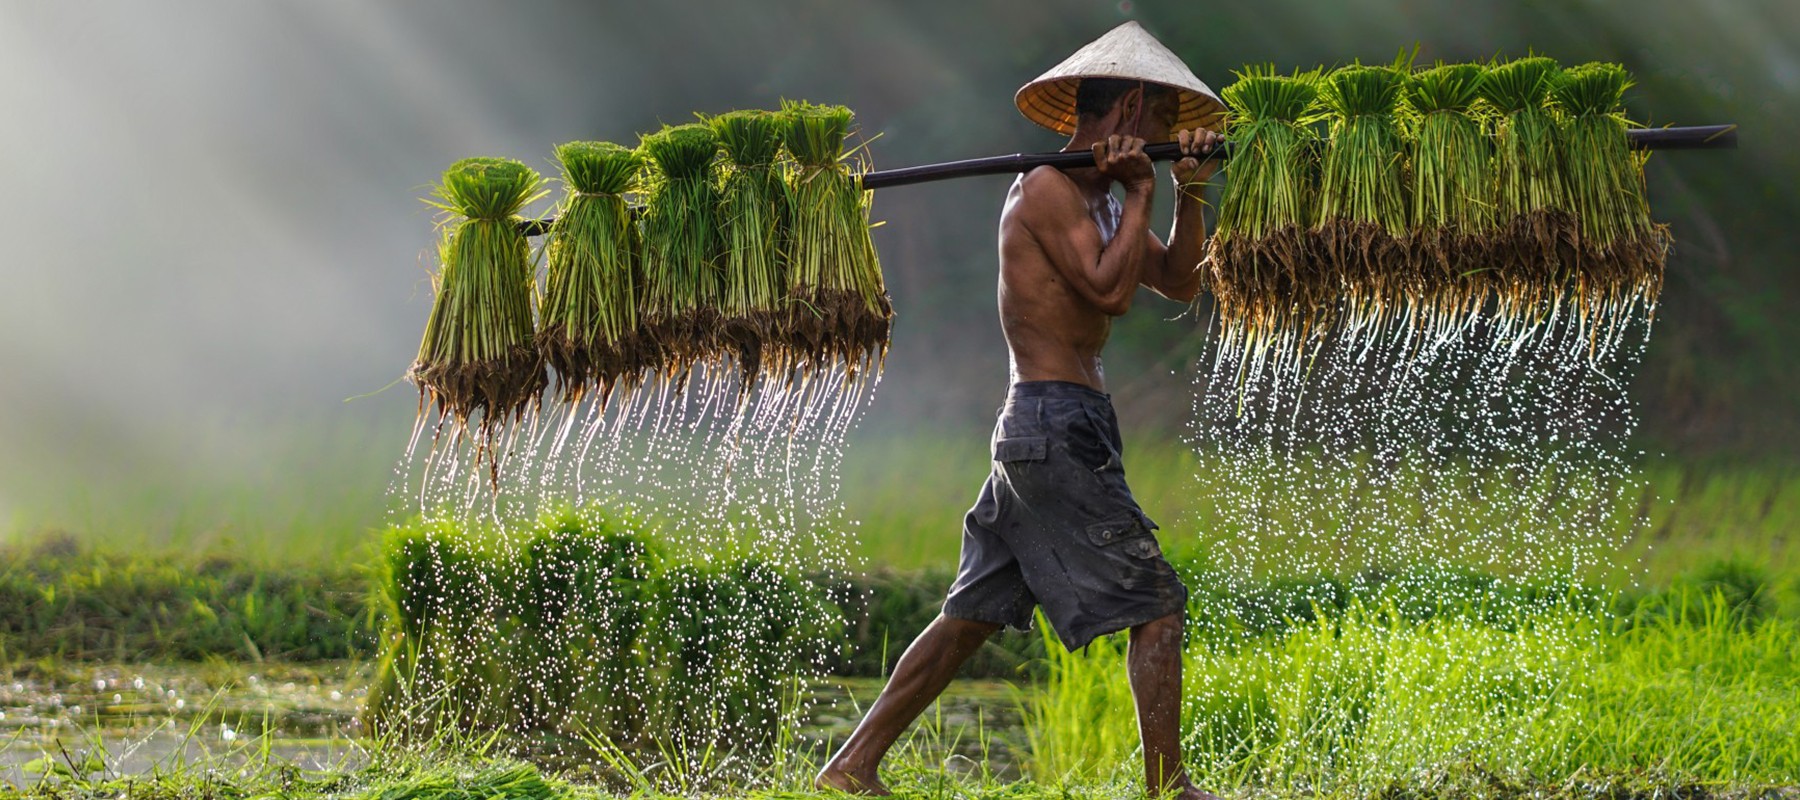 Farmer in asia carrying his harvest through a field